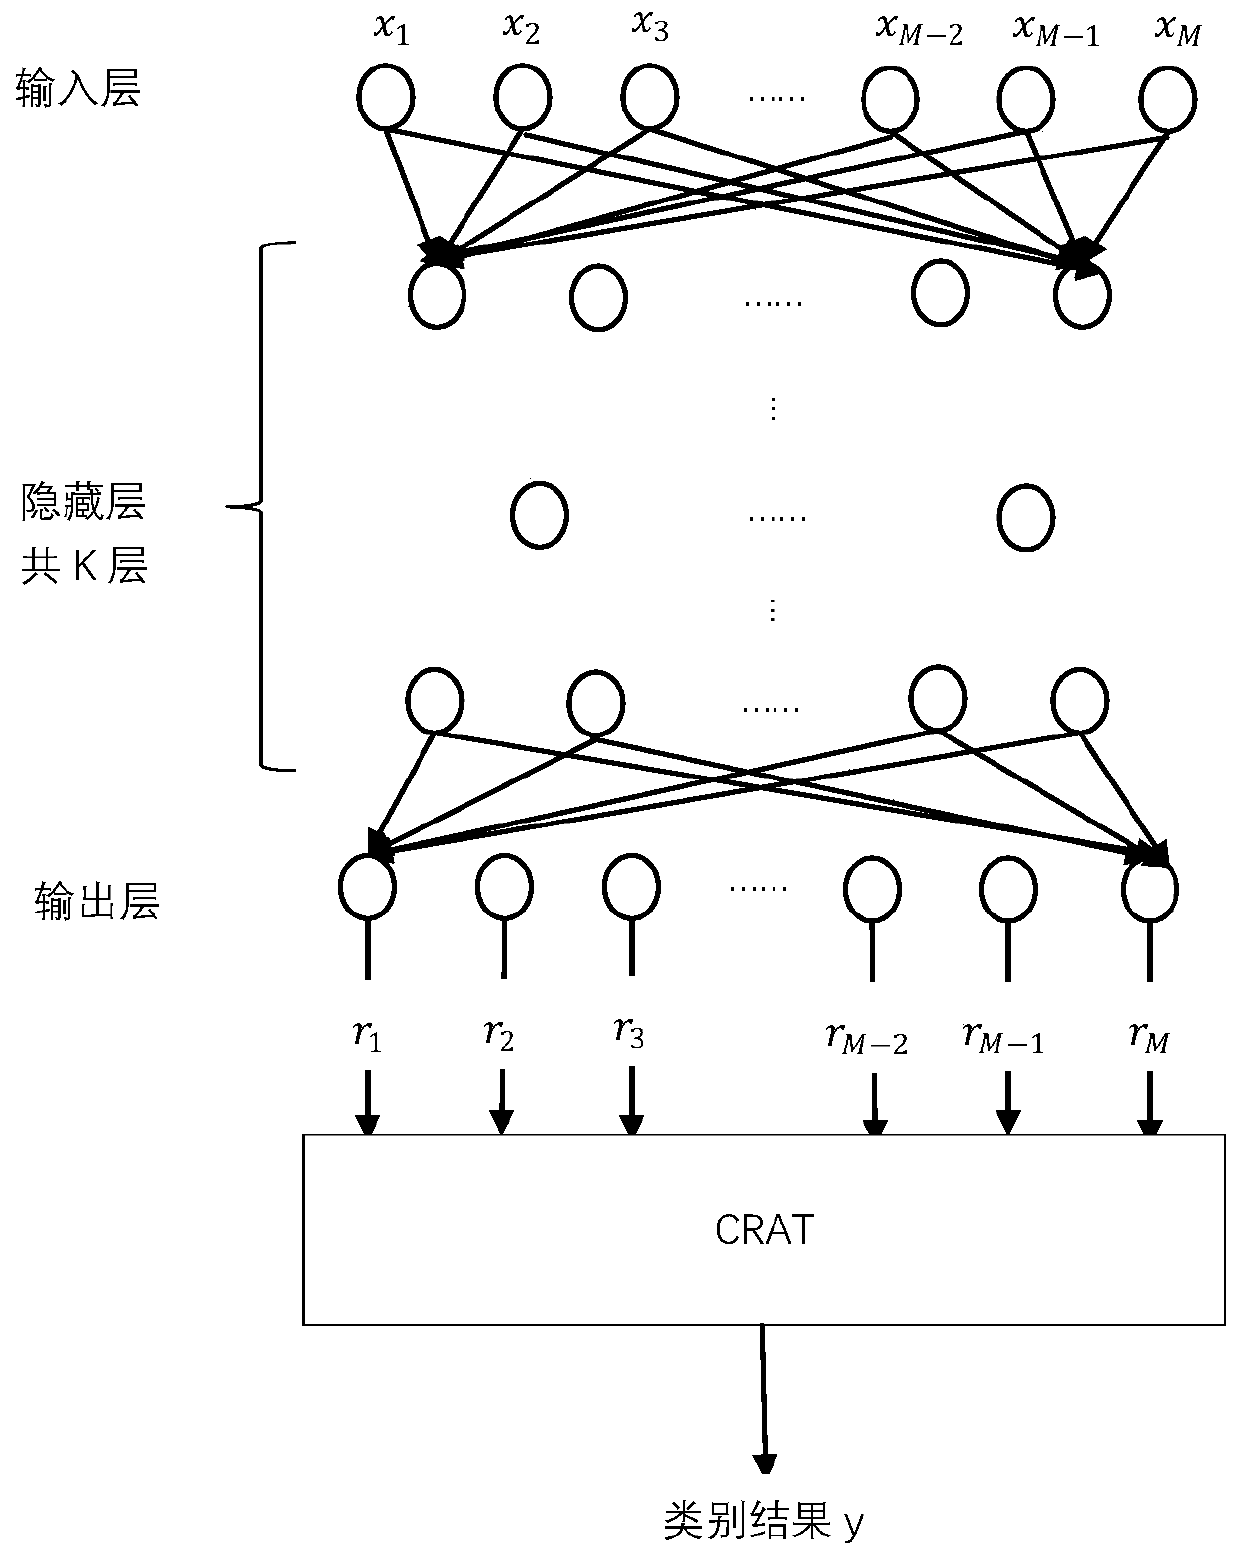 Classification error correction method based on sequence connection model and binary tree model